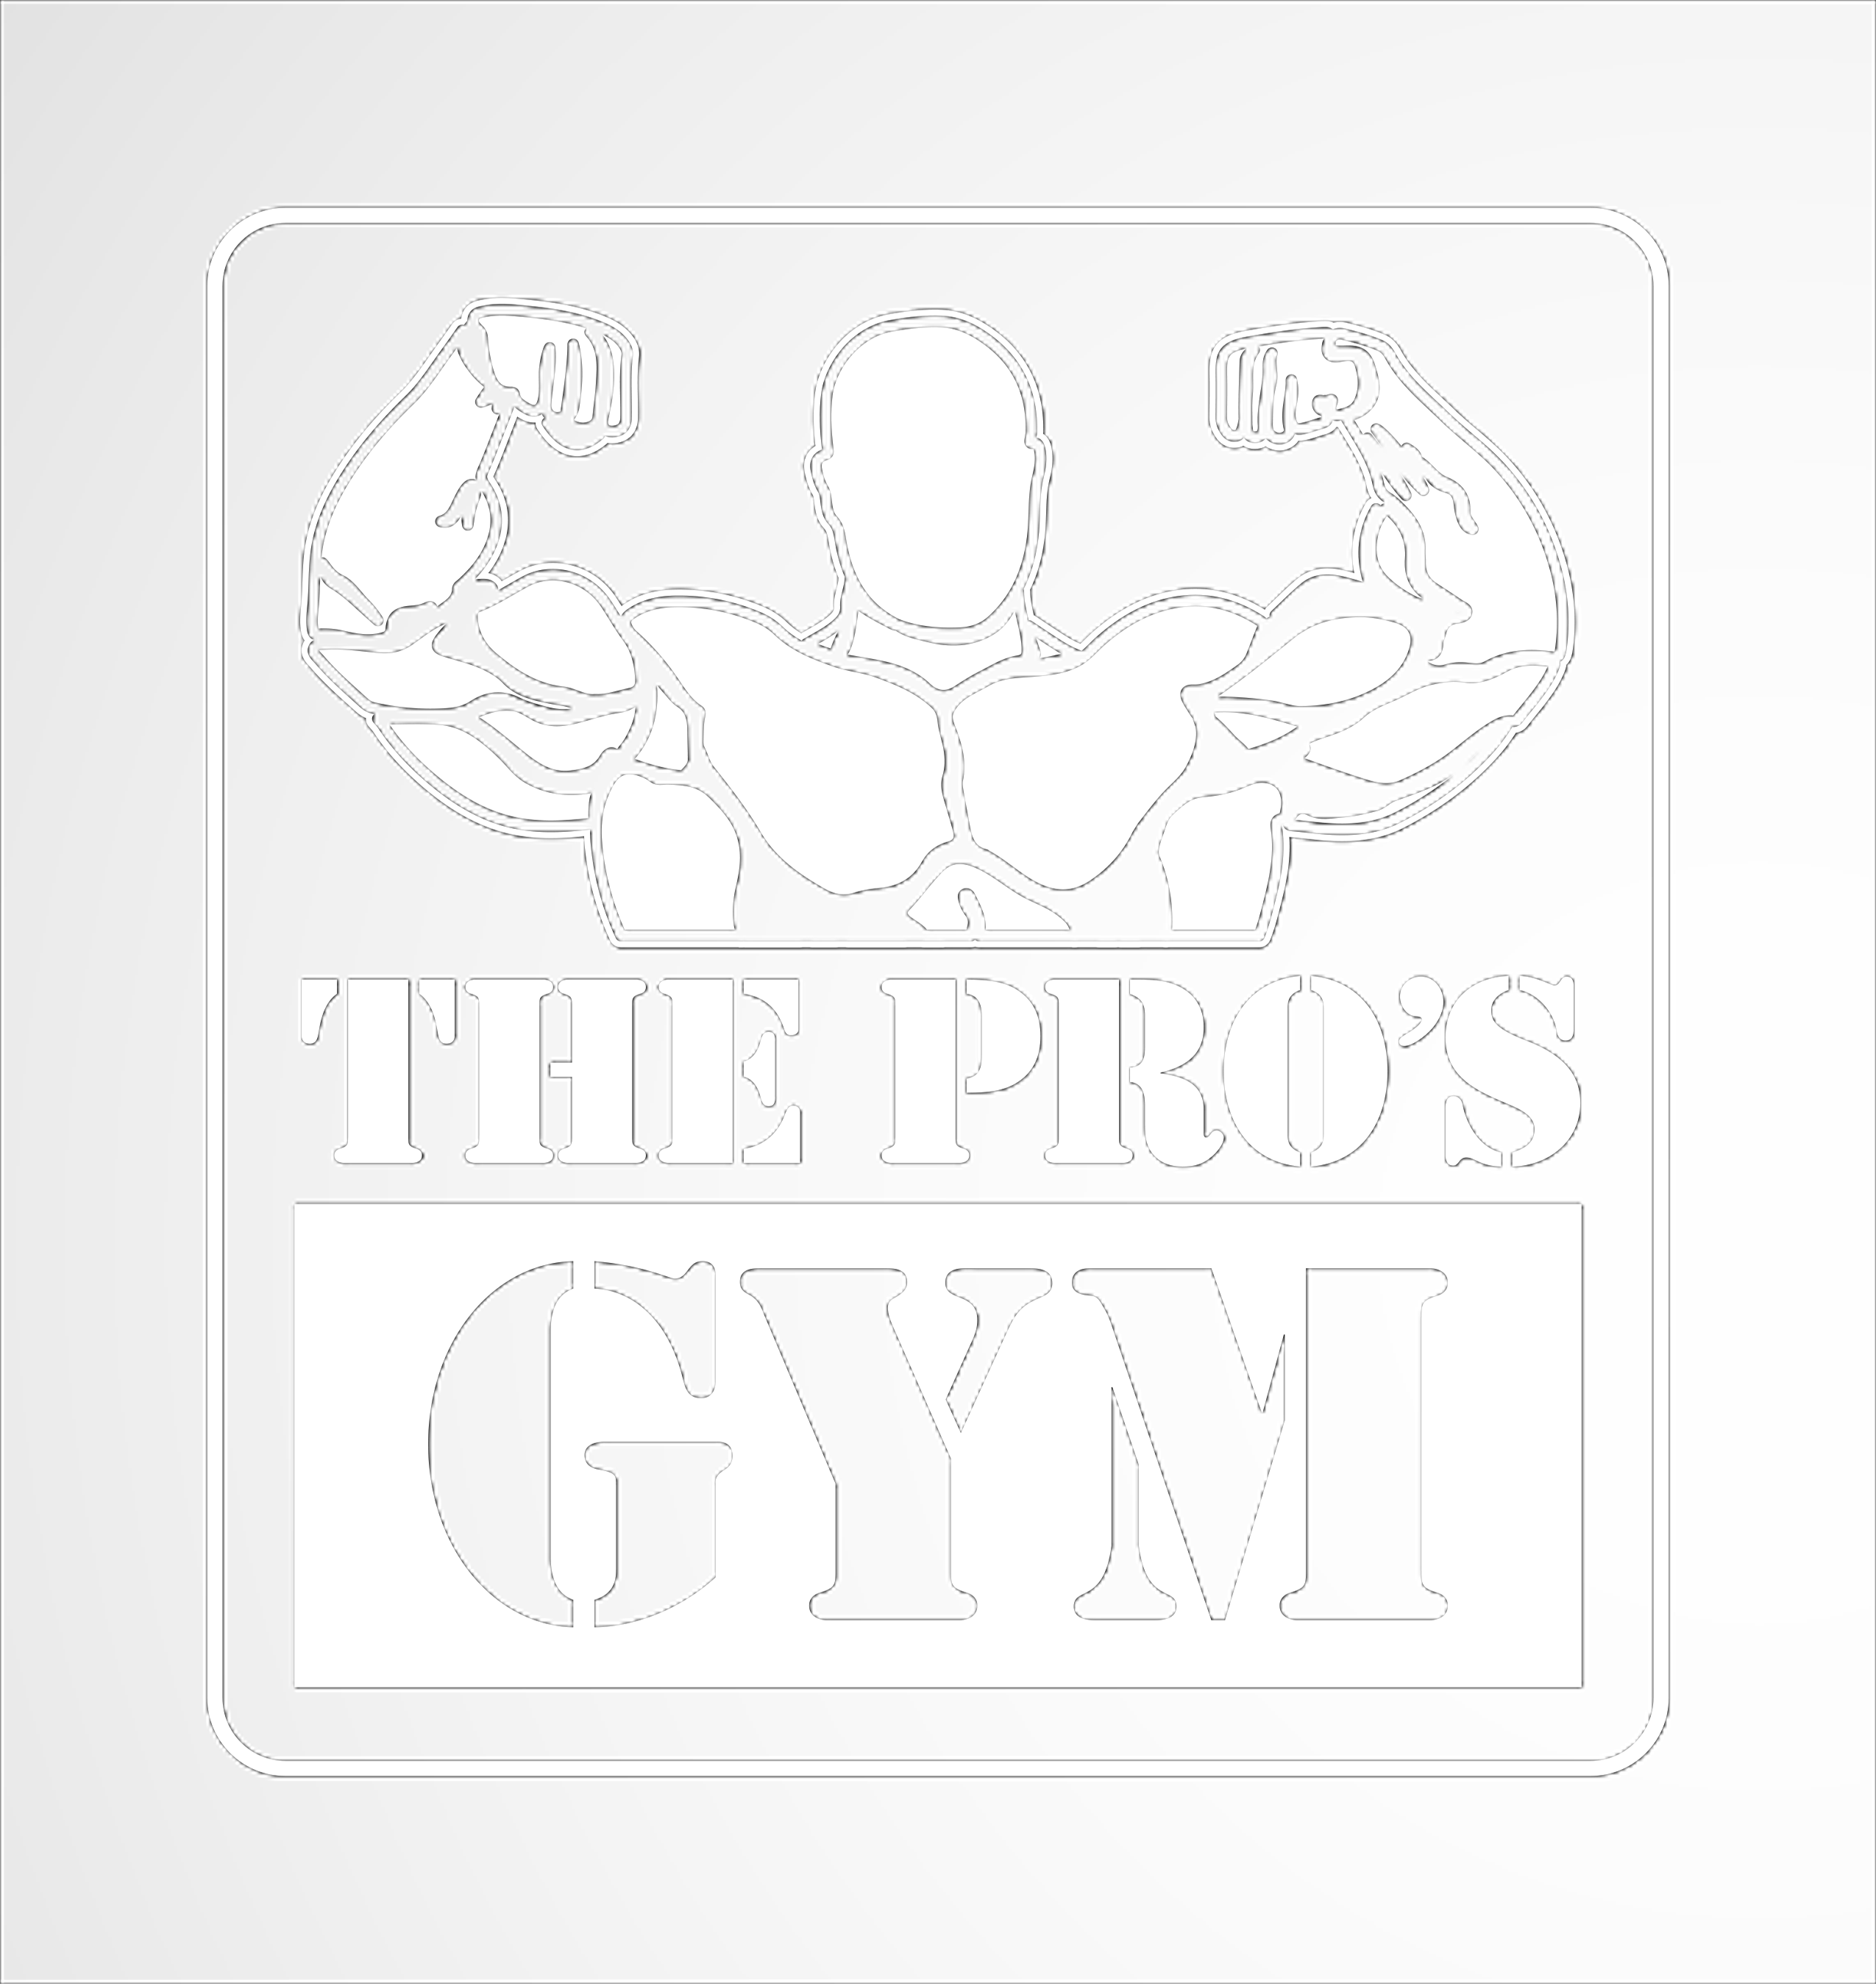 Powerhouse Gym Columbus Ohio – Official Gym of The Arnold Sports Festival